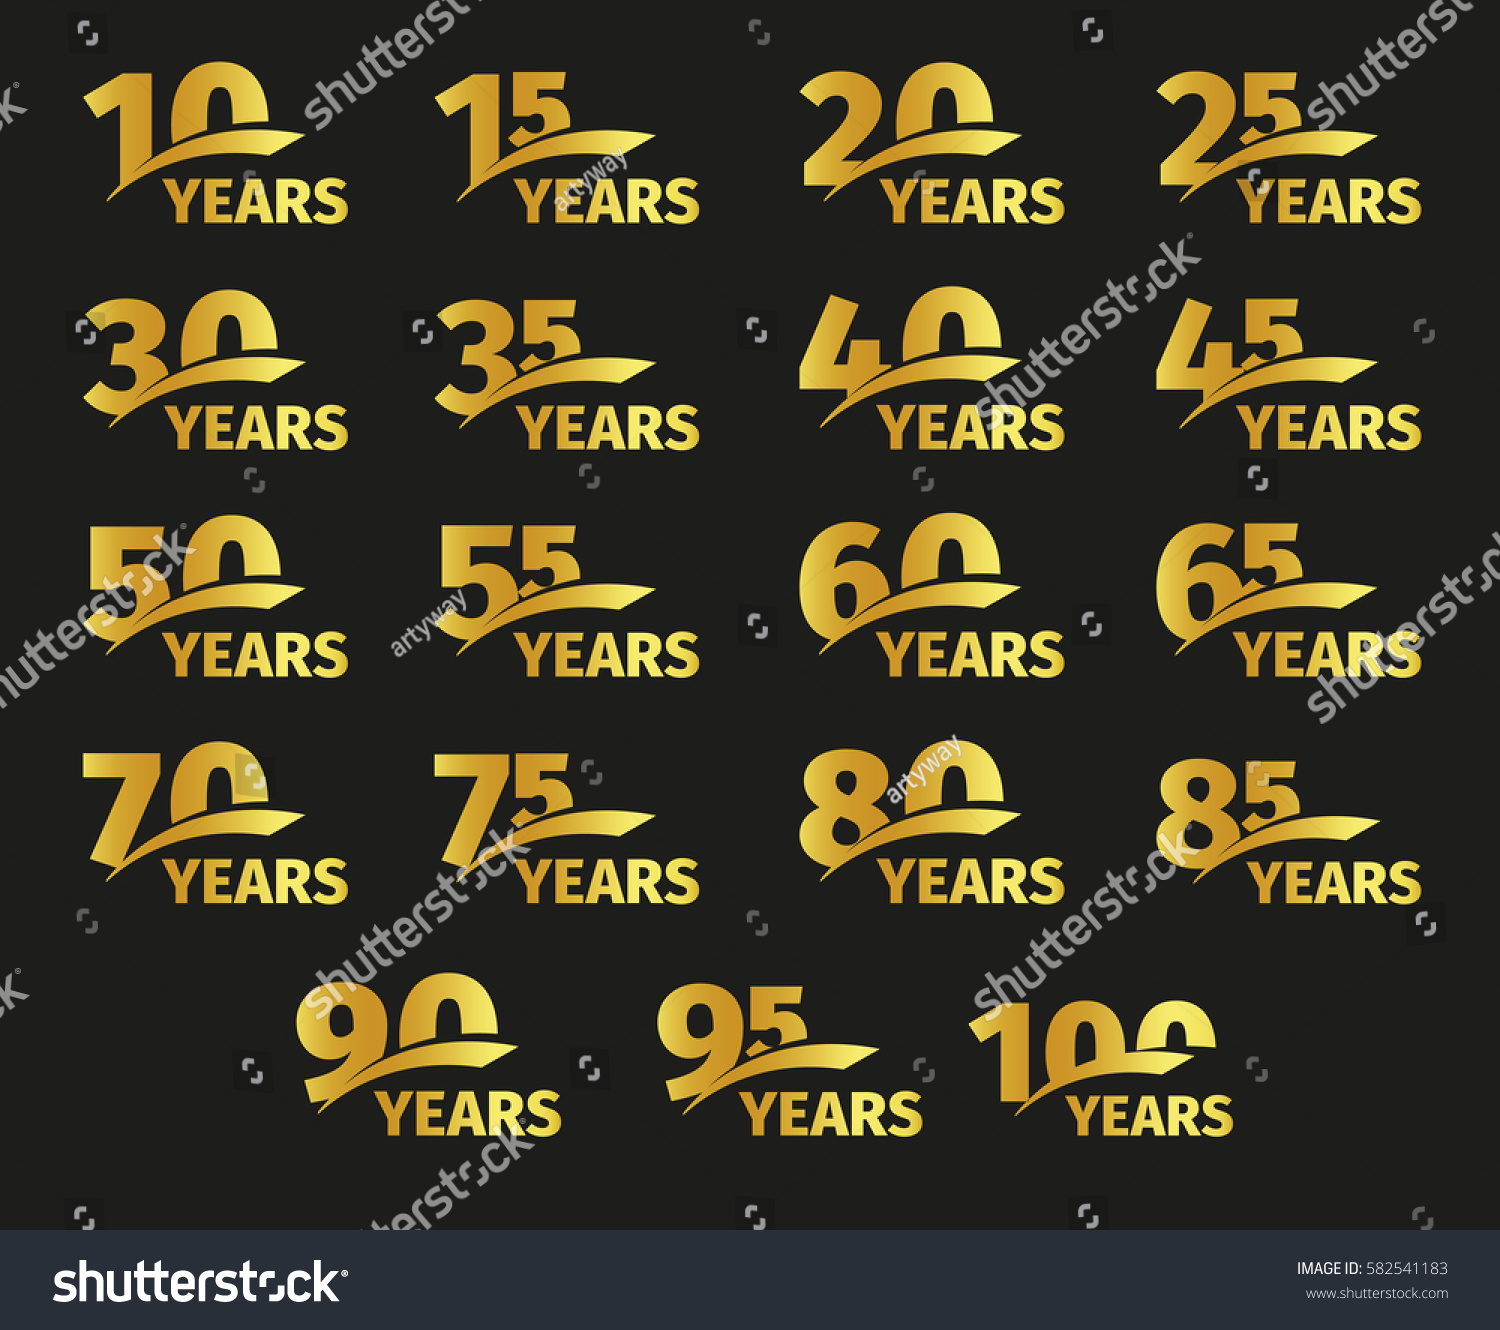 SVG of Isolated golden color numbers with word years icons collection on black background, birthday anniversary greeting card elements set vector illustration svg